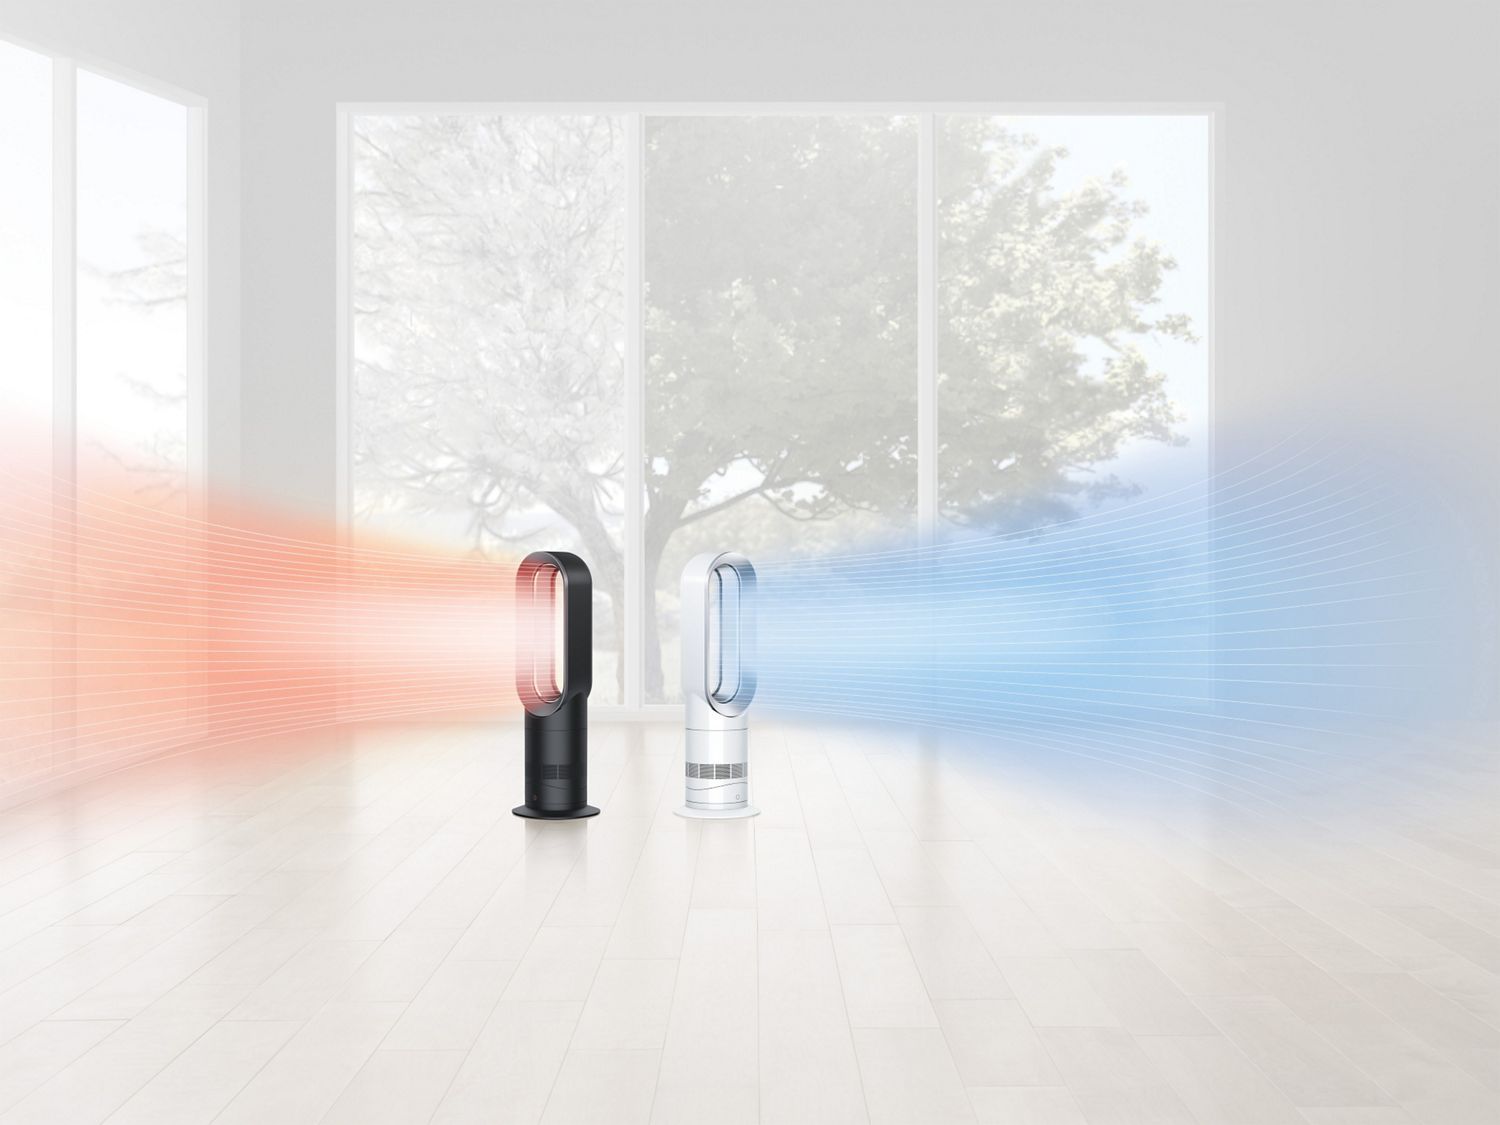 Hot+Cool fan heater features | Dyson Canada